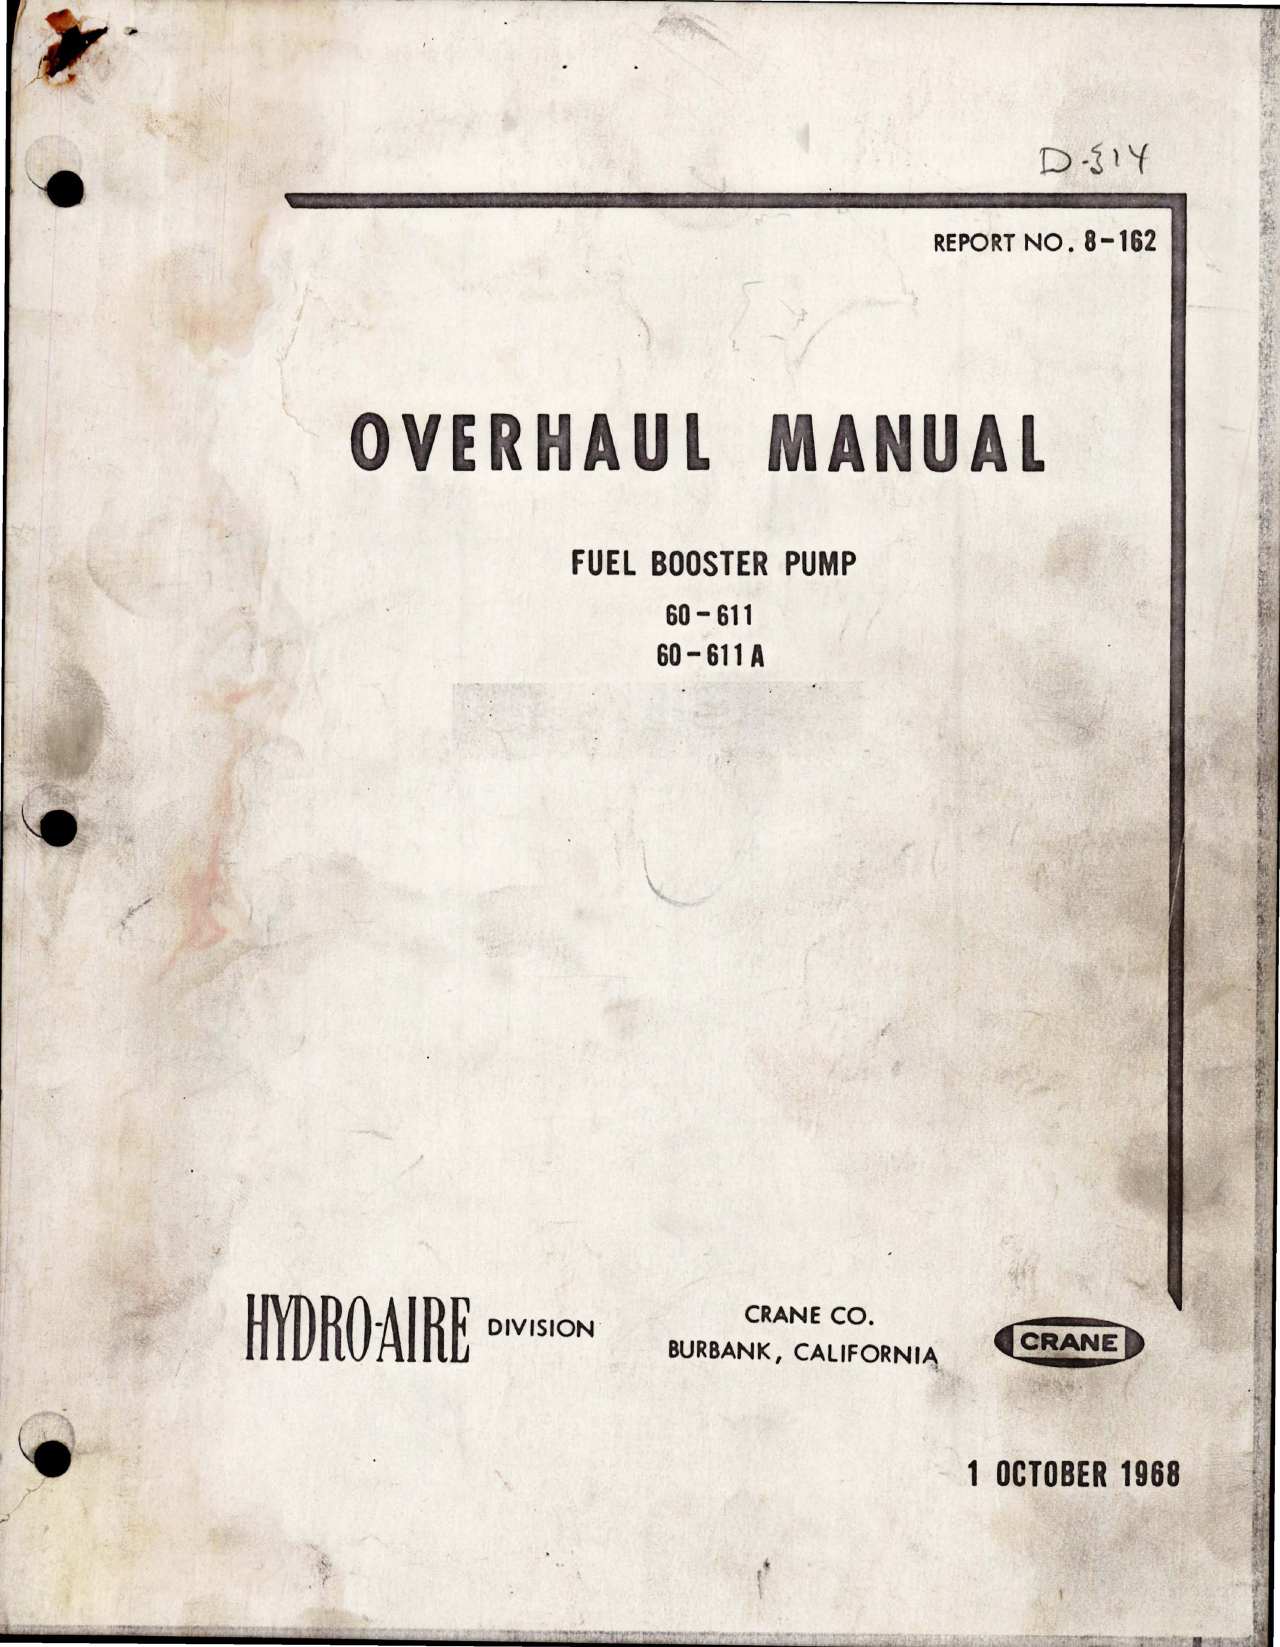 Sample page 1 from AirCorps Library document: Overhaul Manual for Fuel Booster Pump - 60-611 and 60-611A 